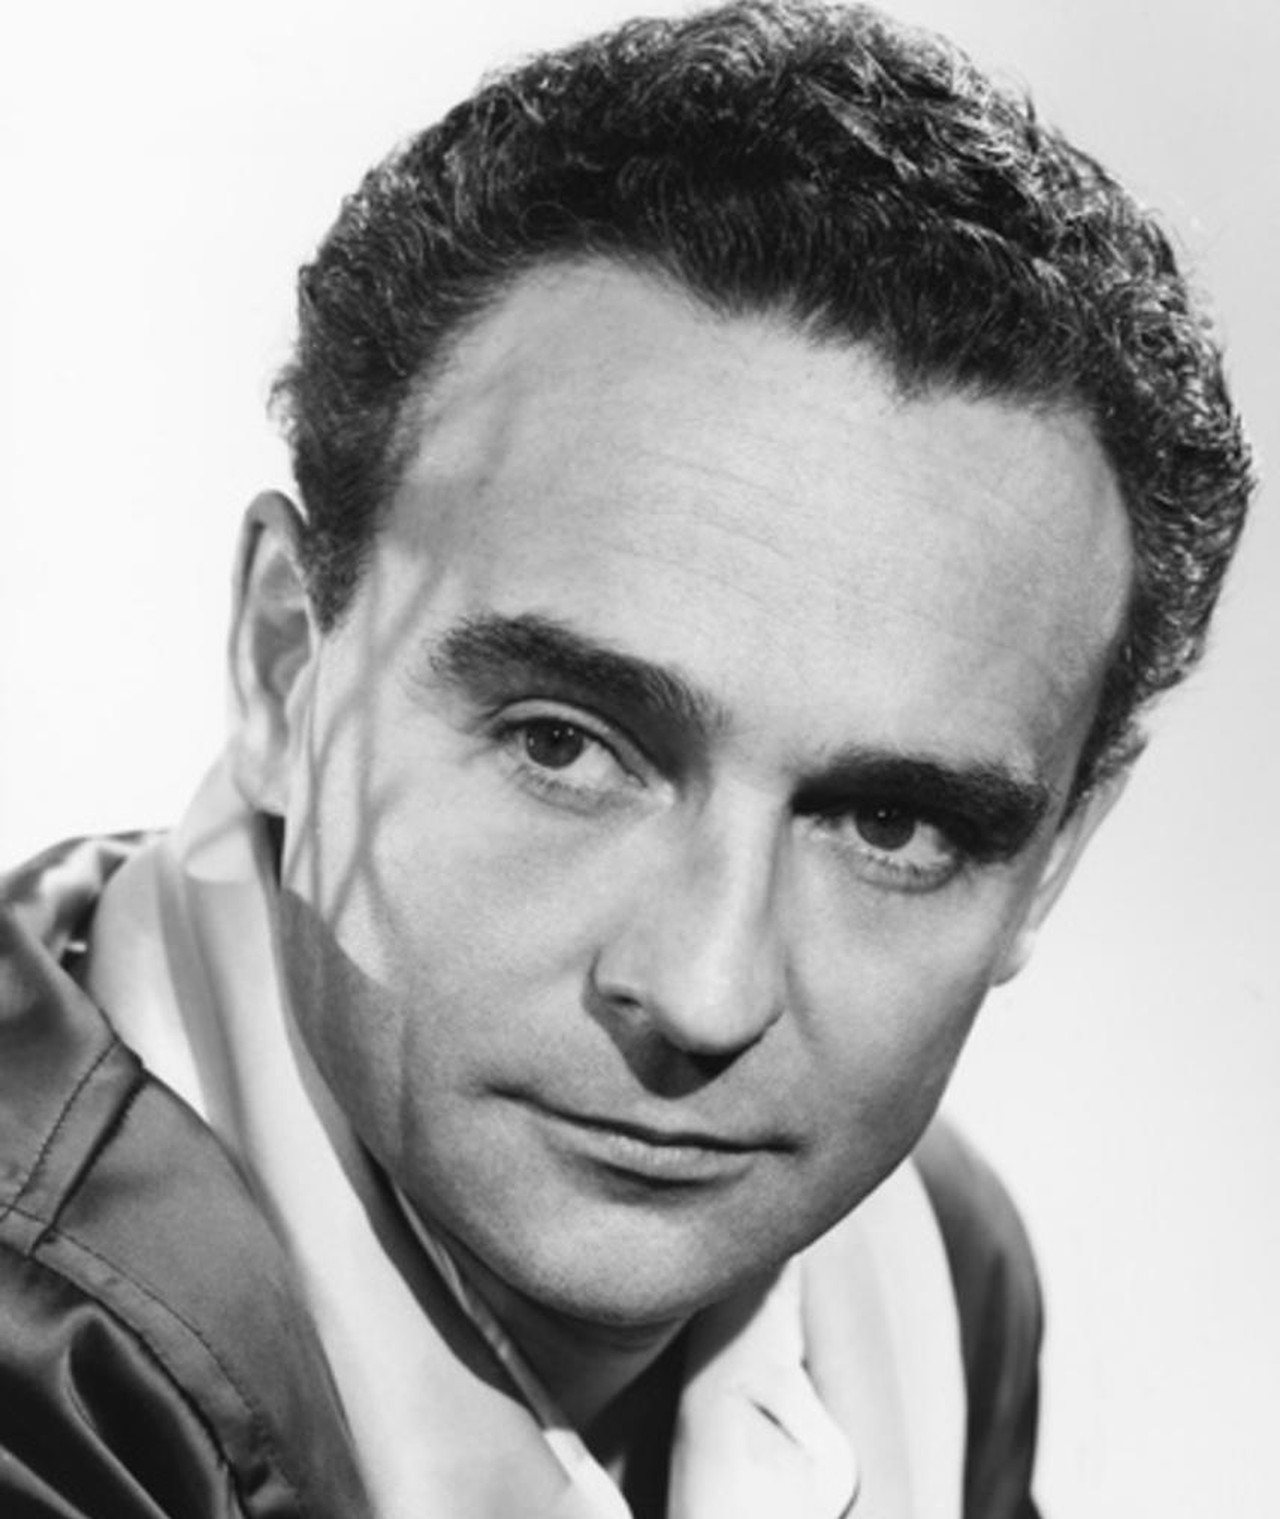 Photo of Kenneth Connor